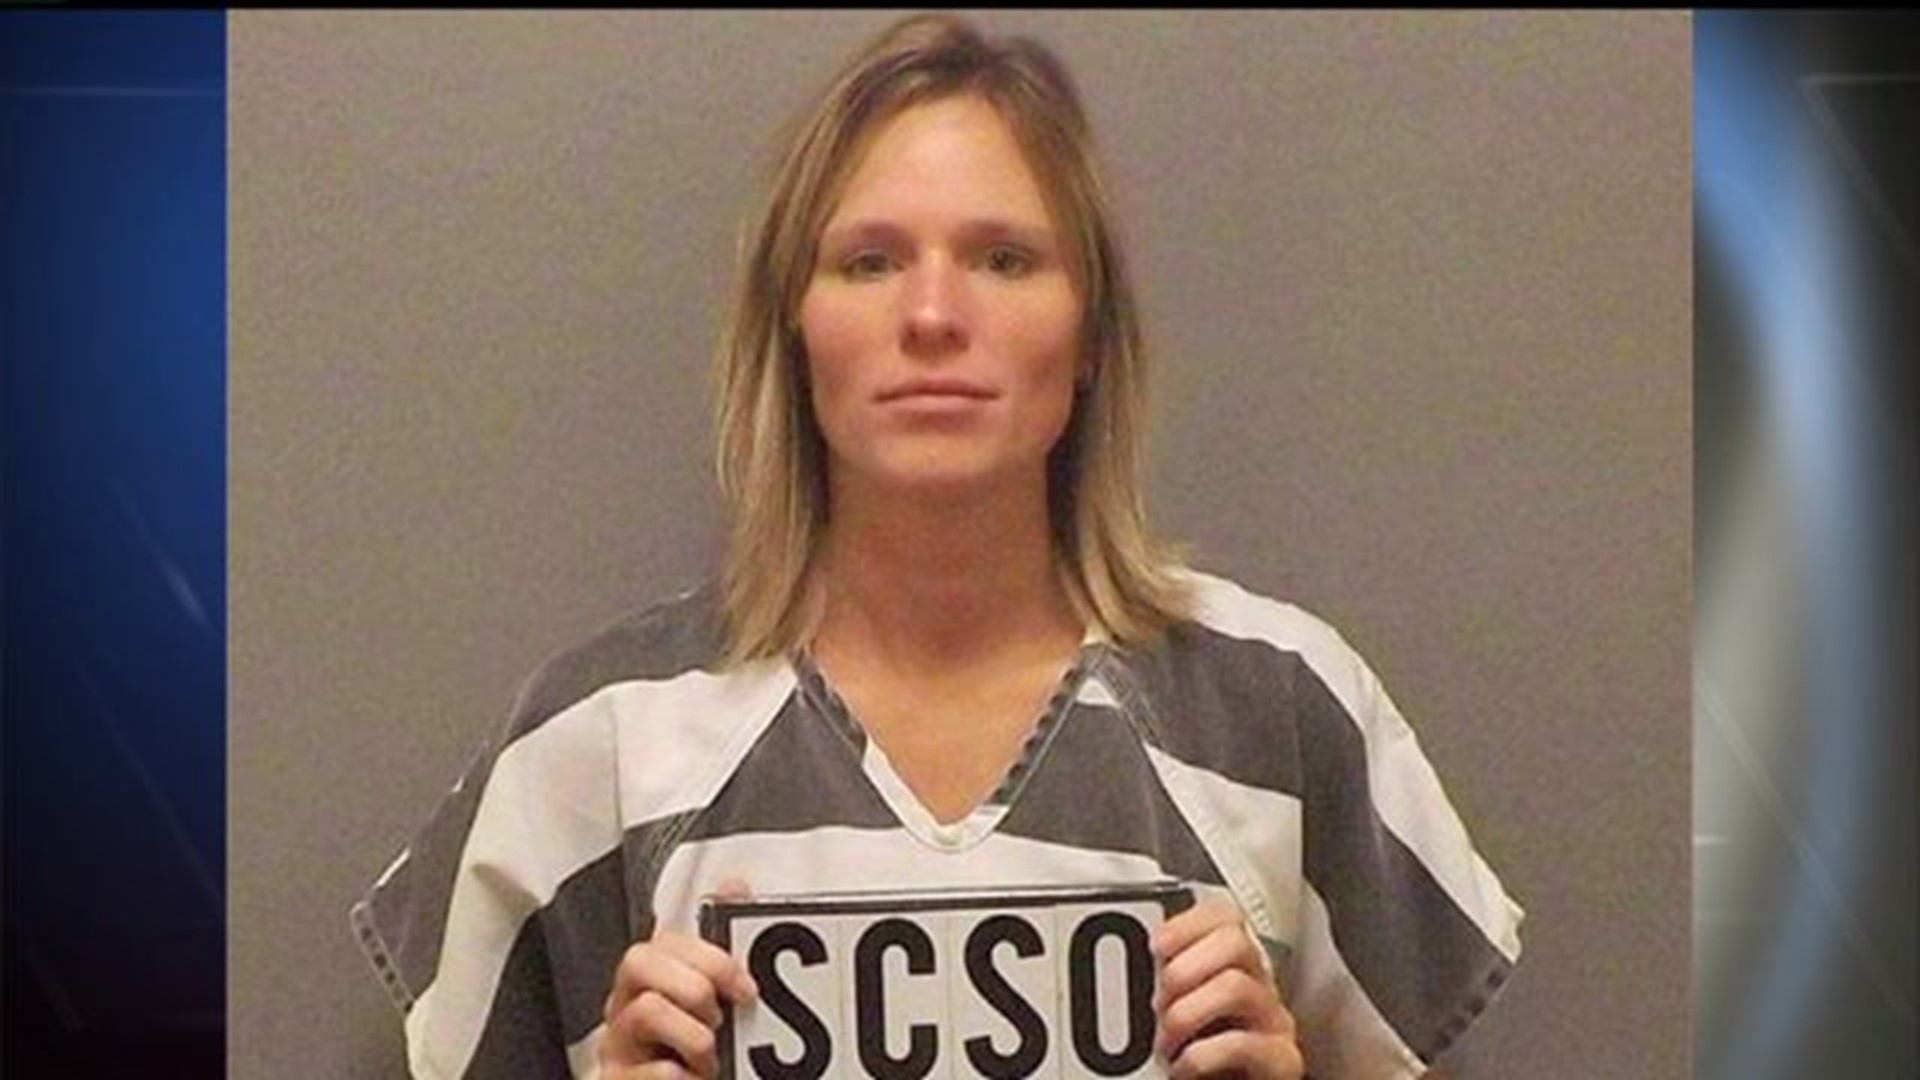 Iowa day care provider gets 100 years in prison for death of 3-year-old